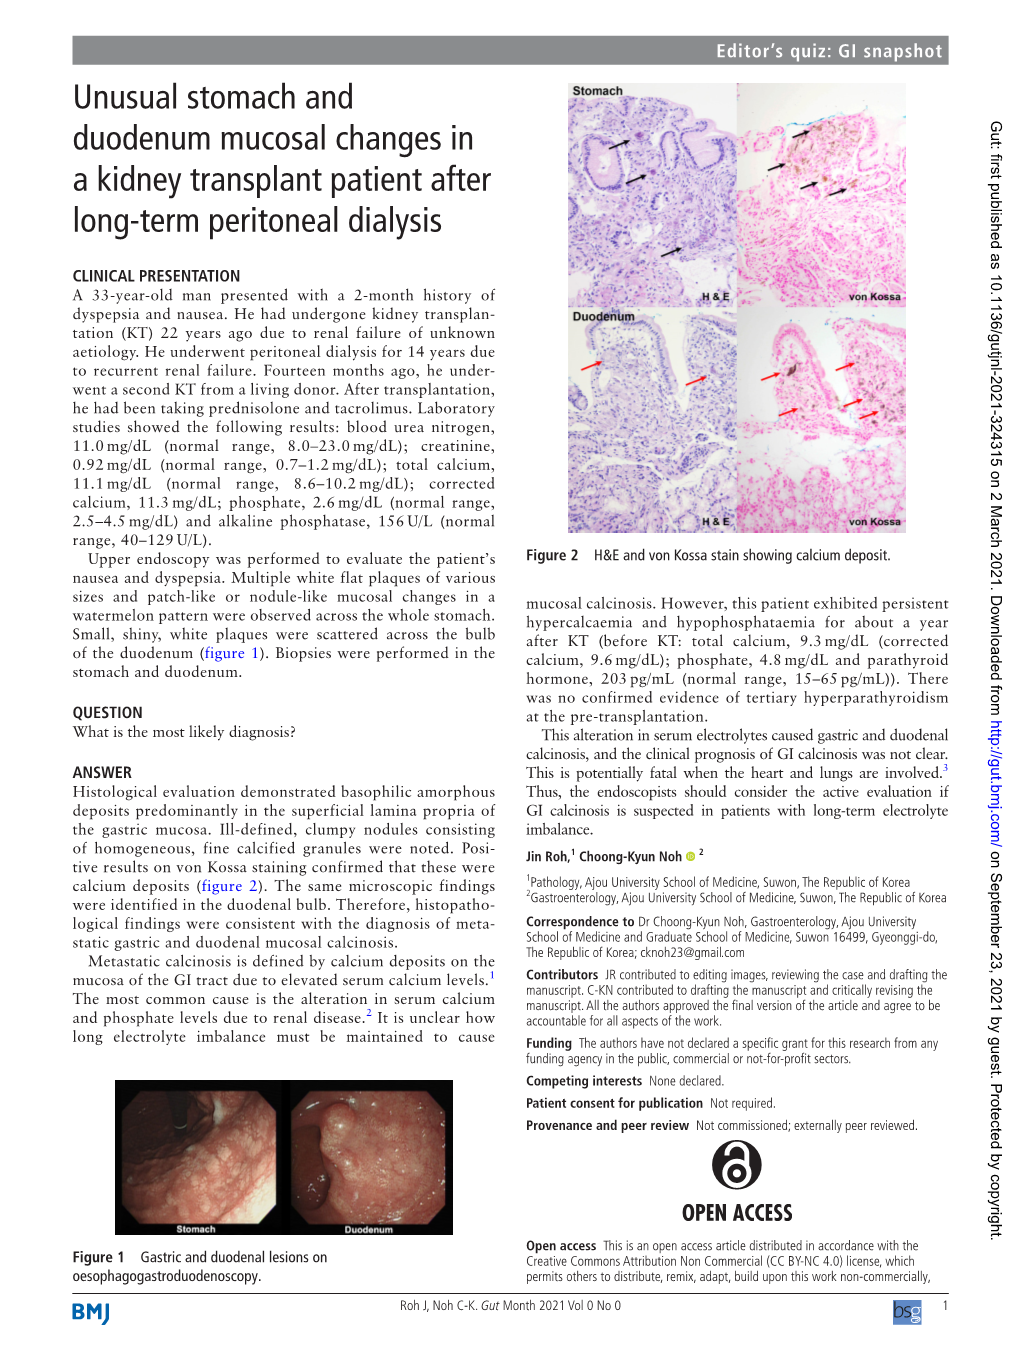 Unusual Stomach and Duodenum Mucosal Changes in a Kidney